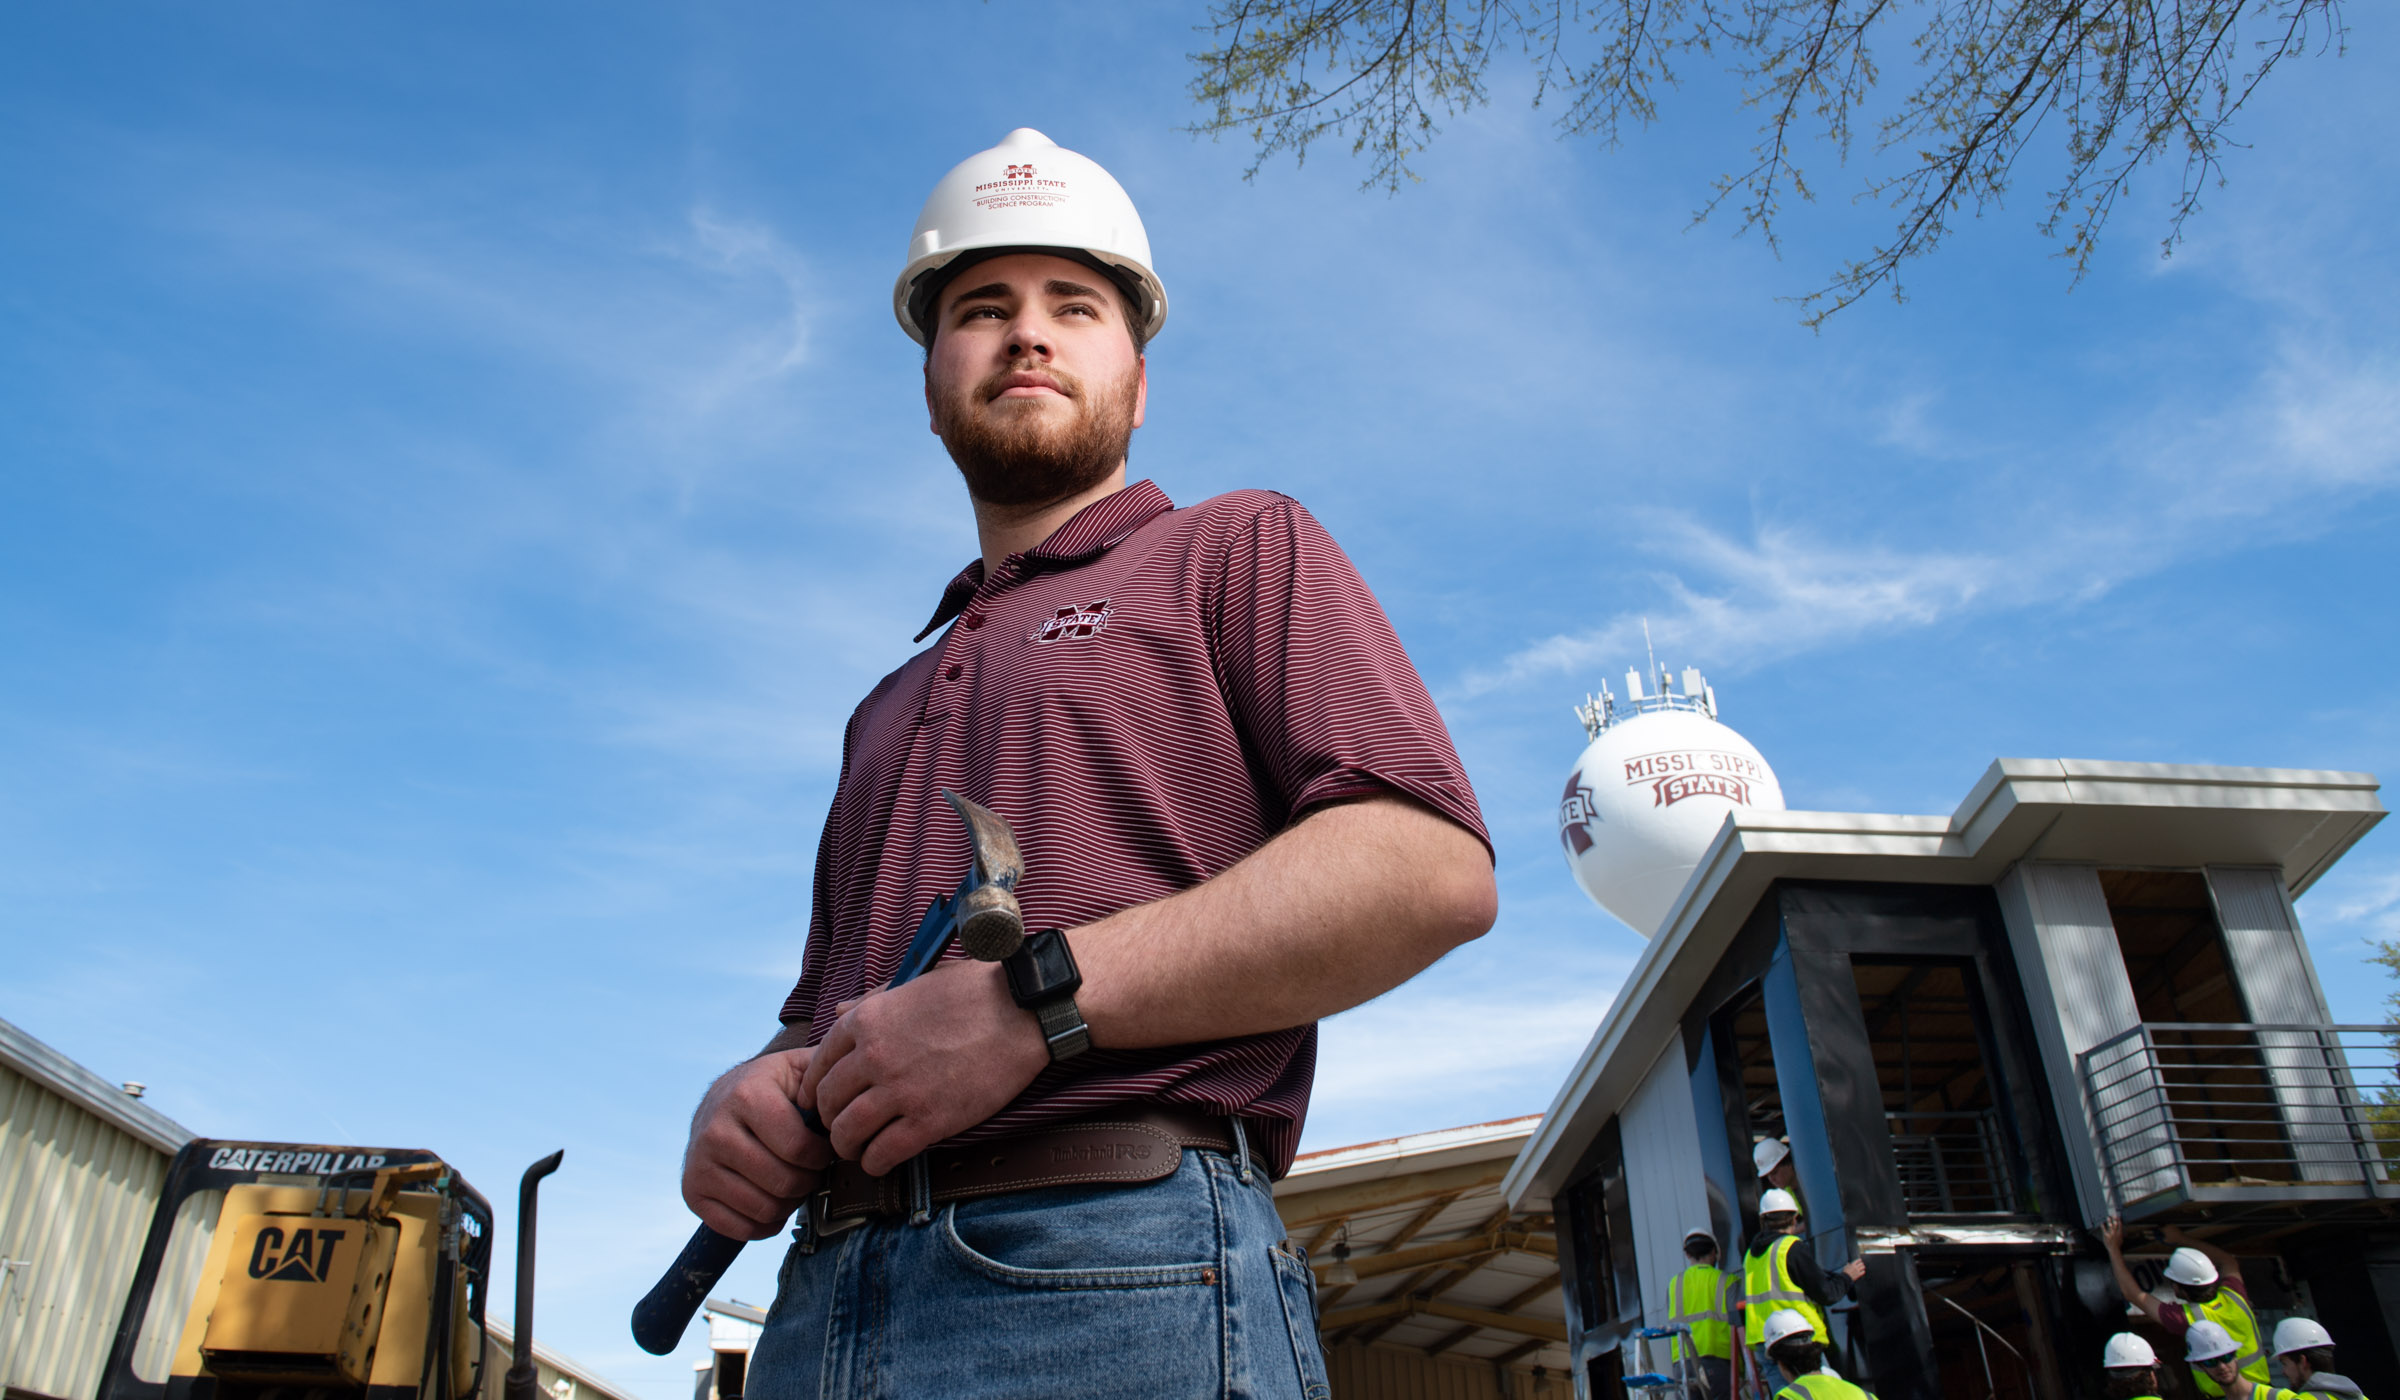 Jack Blacklock stands outside wearing an MSU shirt and hard hat, with construction of a tiny house in the background